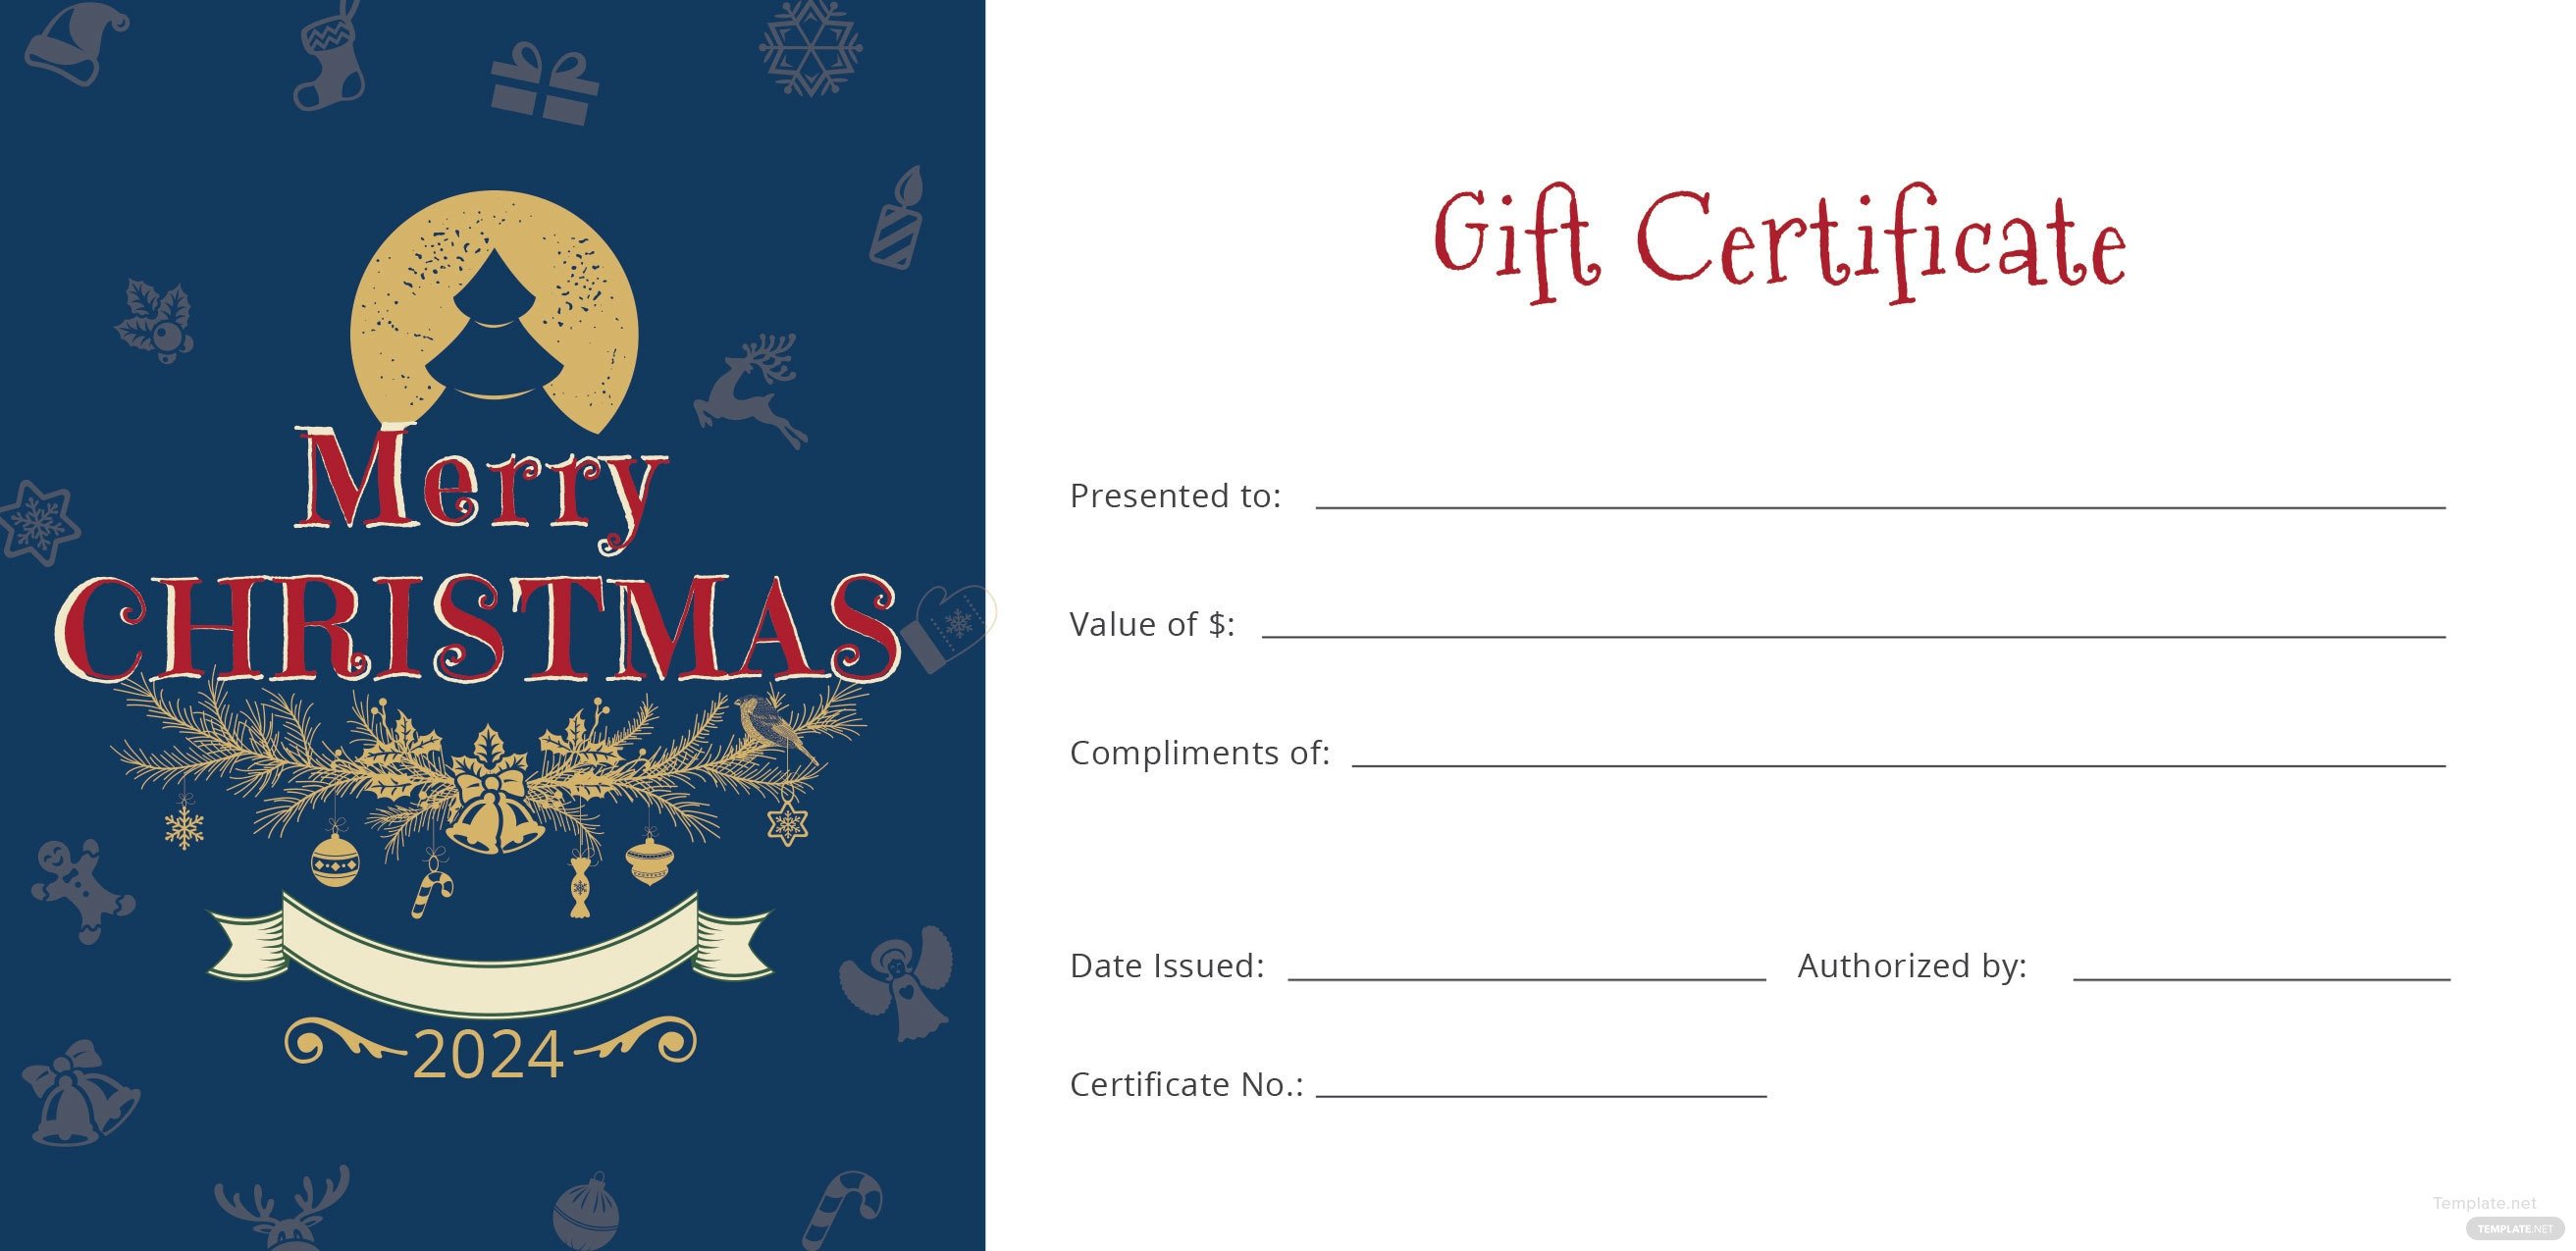 Gift Certificate Template Google Docs Free Christmas Gift Certificate Template In Adobe